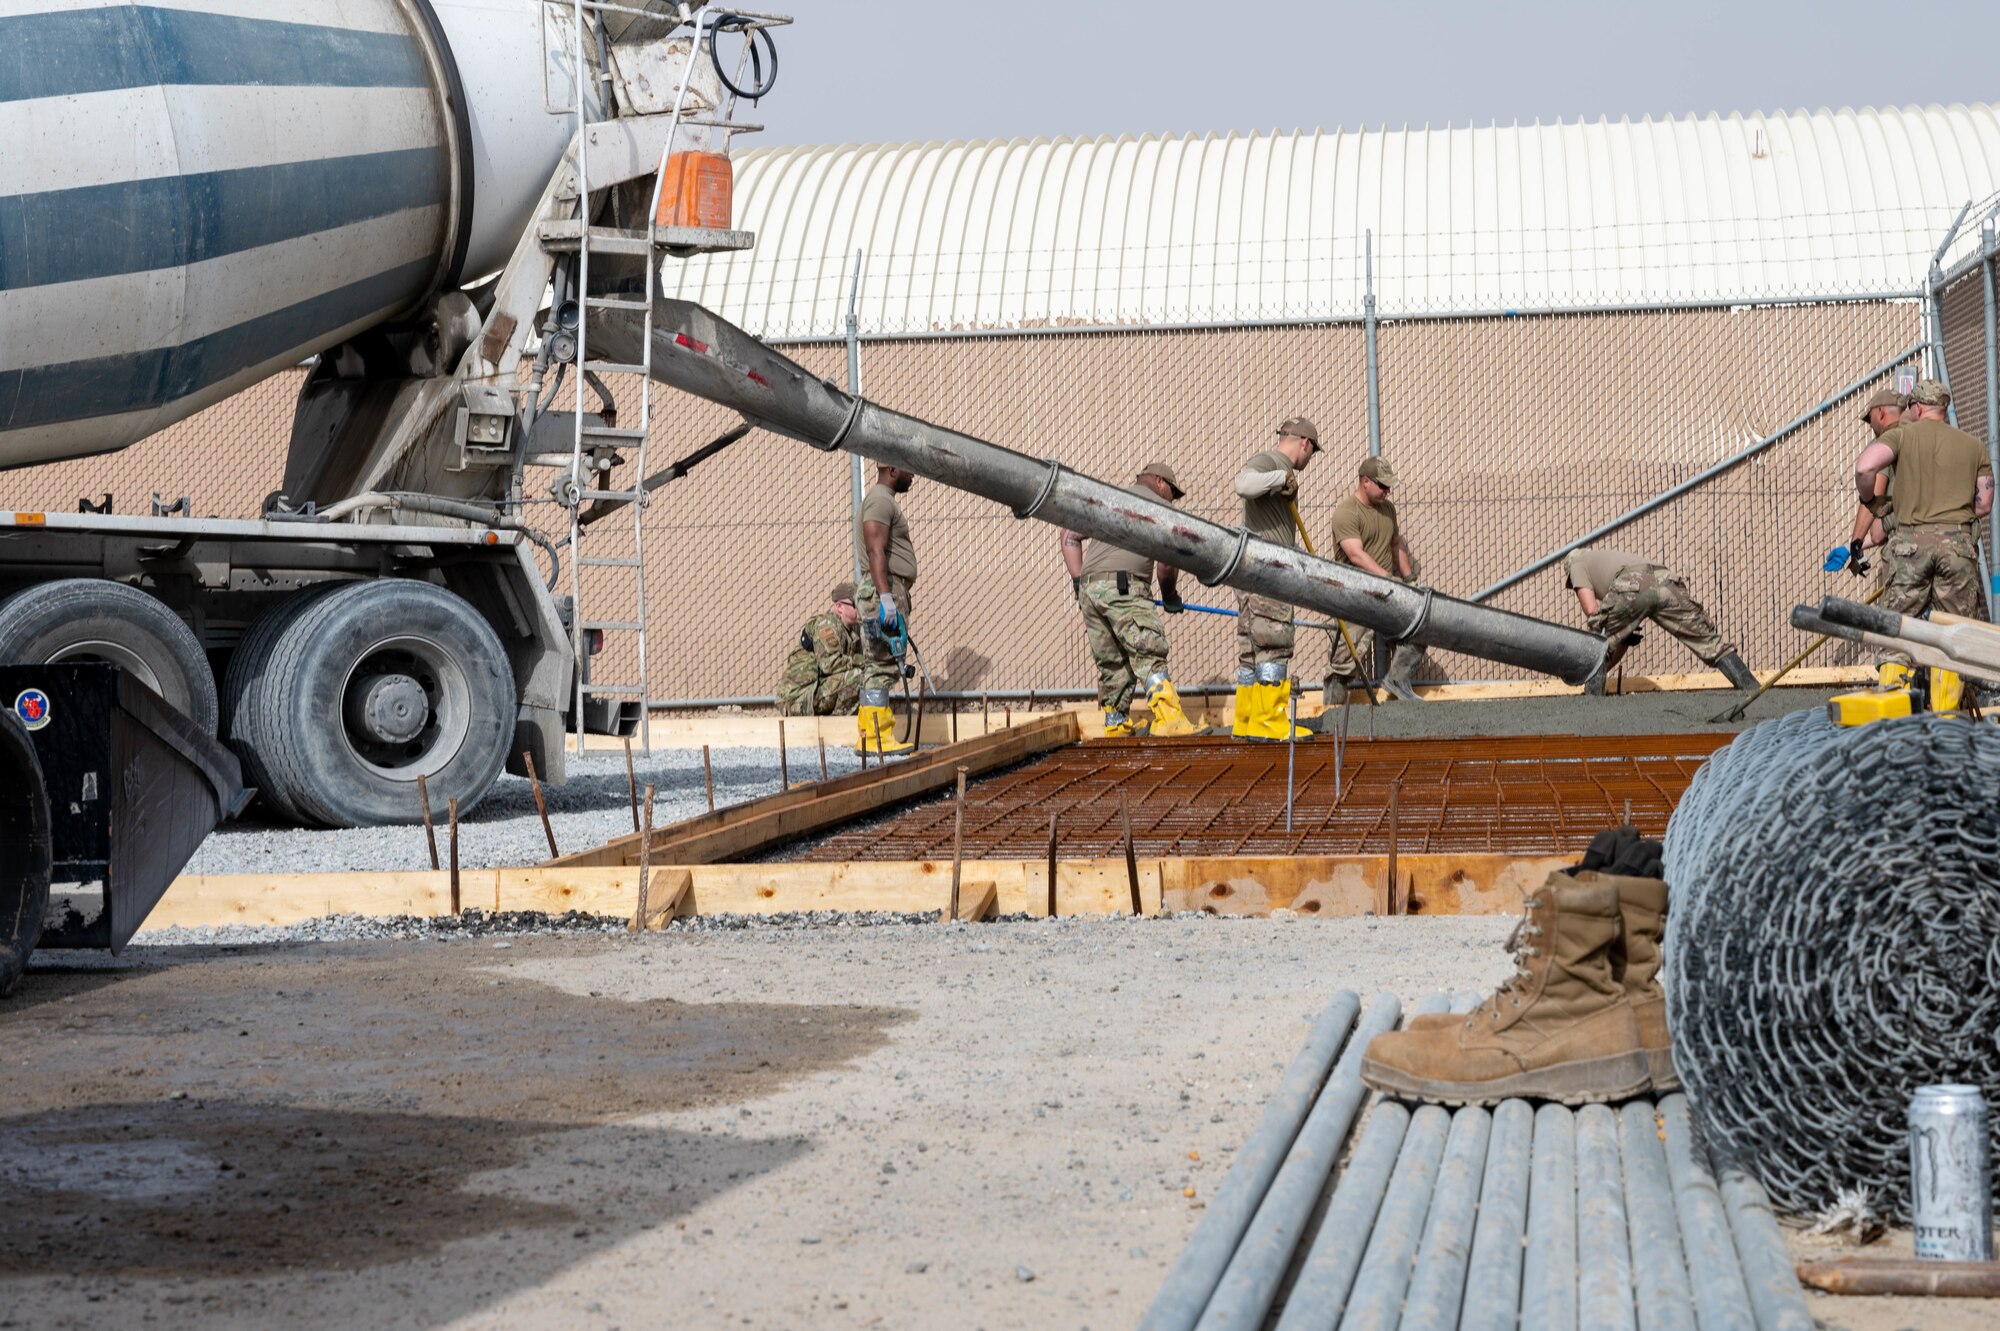 As an expeditionary engineering group based out of Al Udeid Air Base, Qatar, Prime BEEF can go anywhere in the U.S. Air Forces Central Command area of responsibility as needed. Established in October 1964, they support frontline construction, emergency management and a myriad of other specialized mission responsibilities.